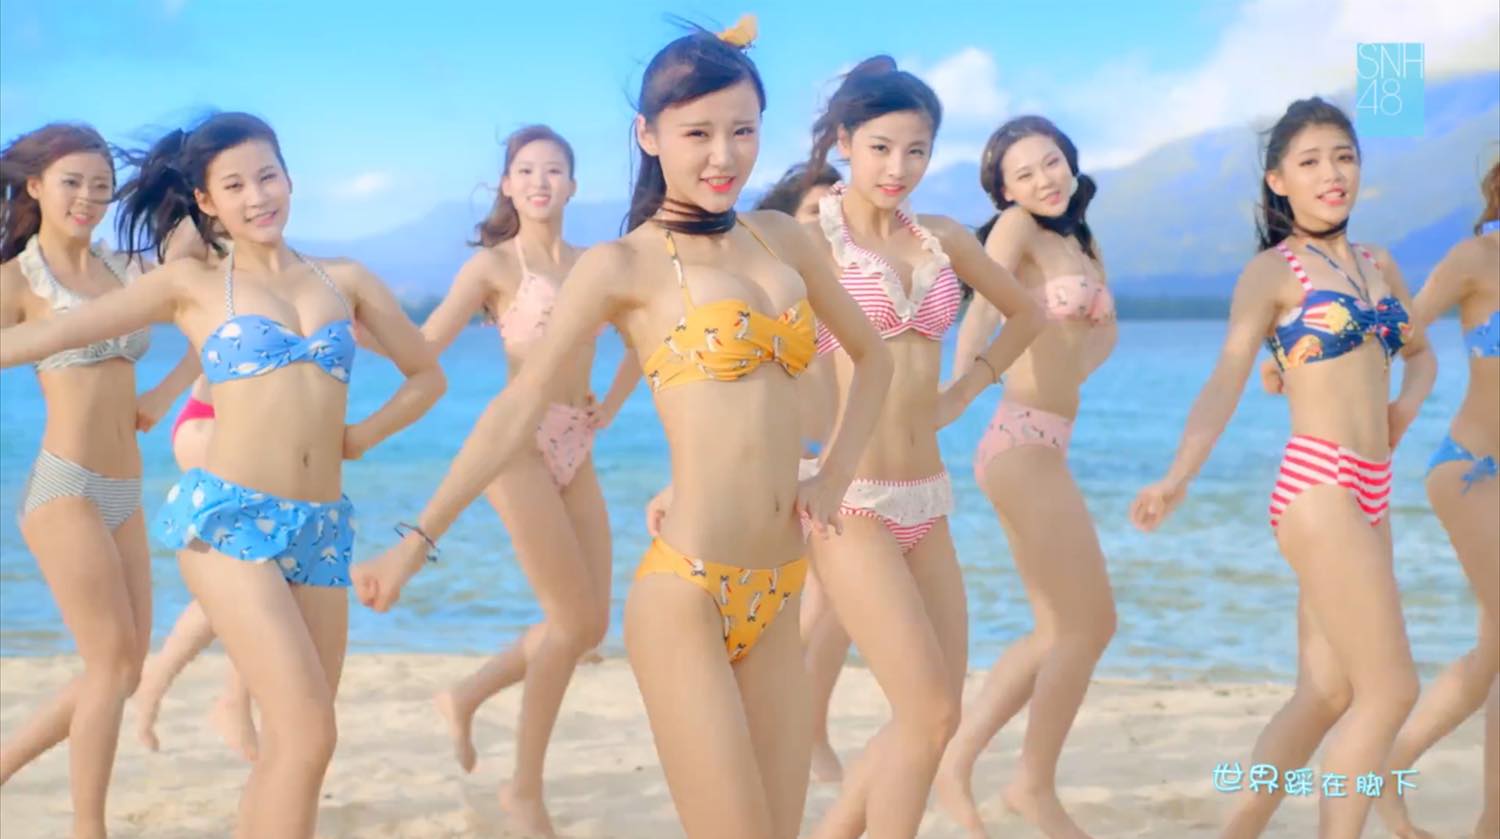 Sandy Beaches! Mermaids! Flying Whales? SNH48 Heat Up Summer With The MV for “Dream Land”!